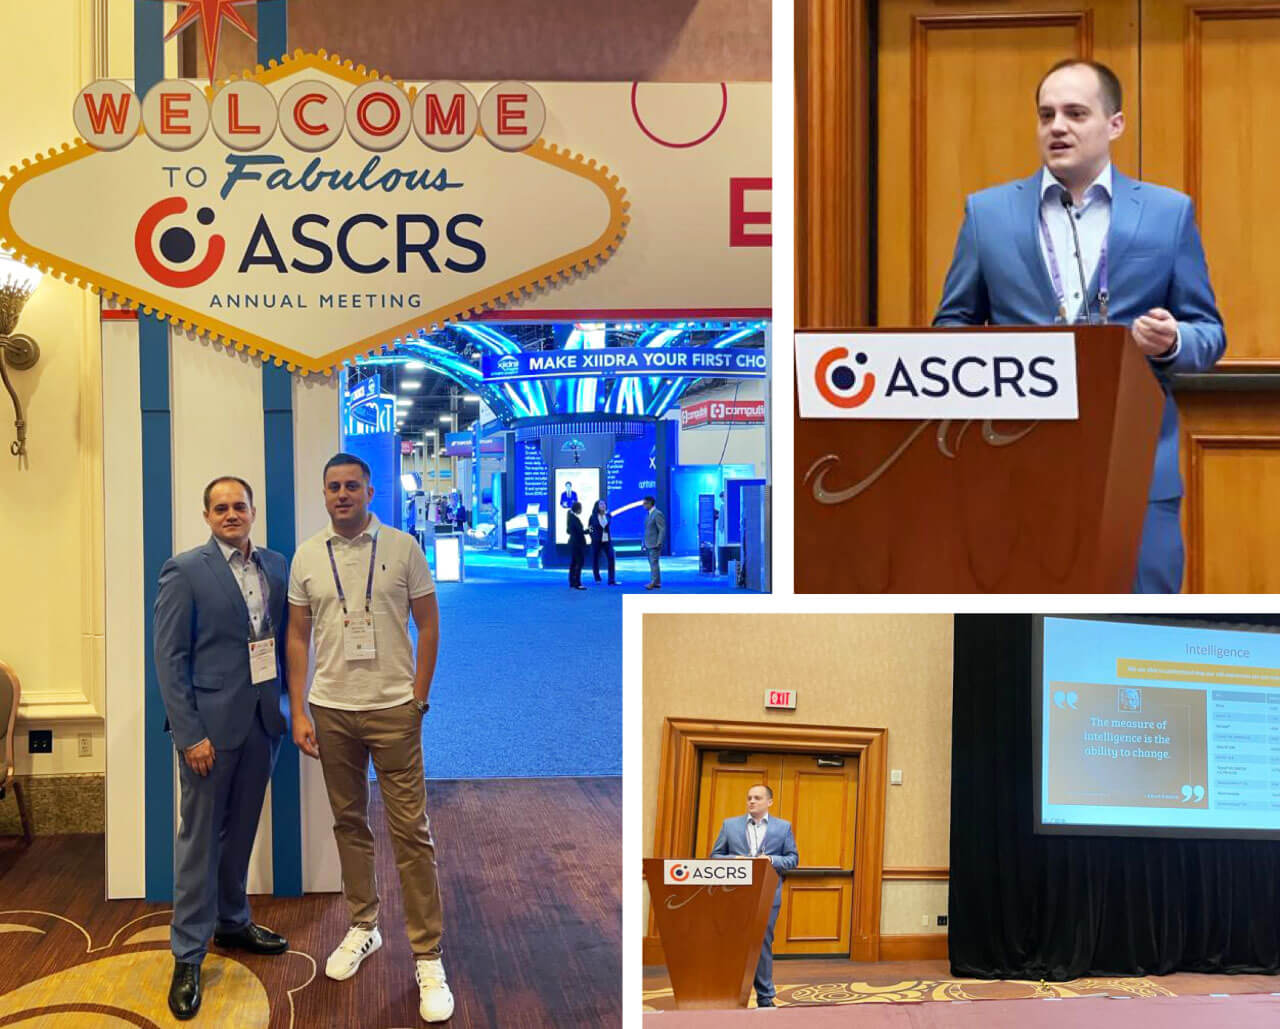 Congress of the American Society for Cataract and Refractive Surgery (ASCRS)